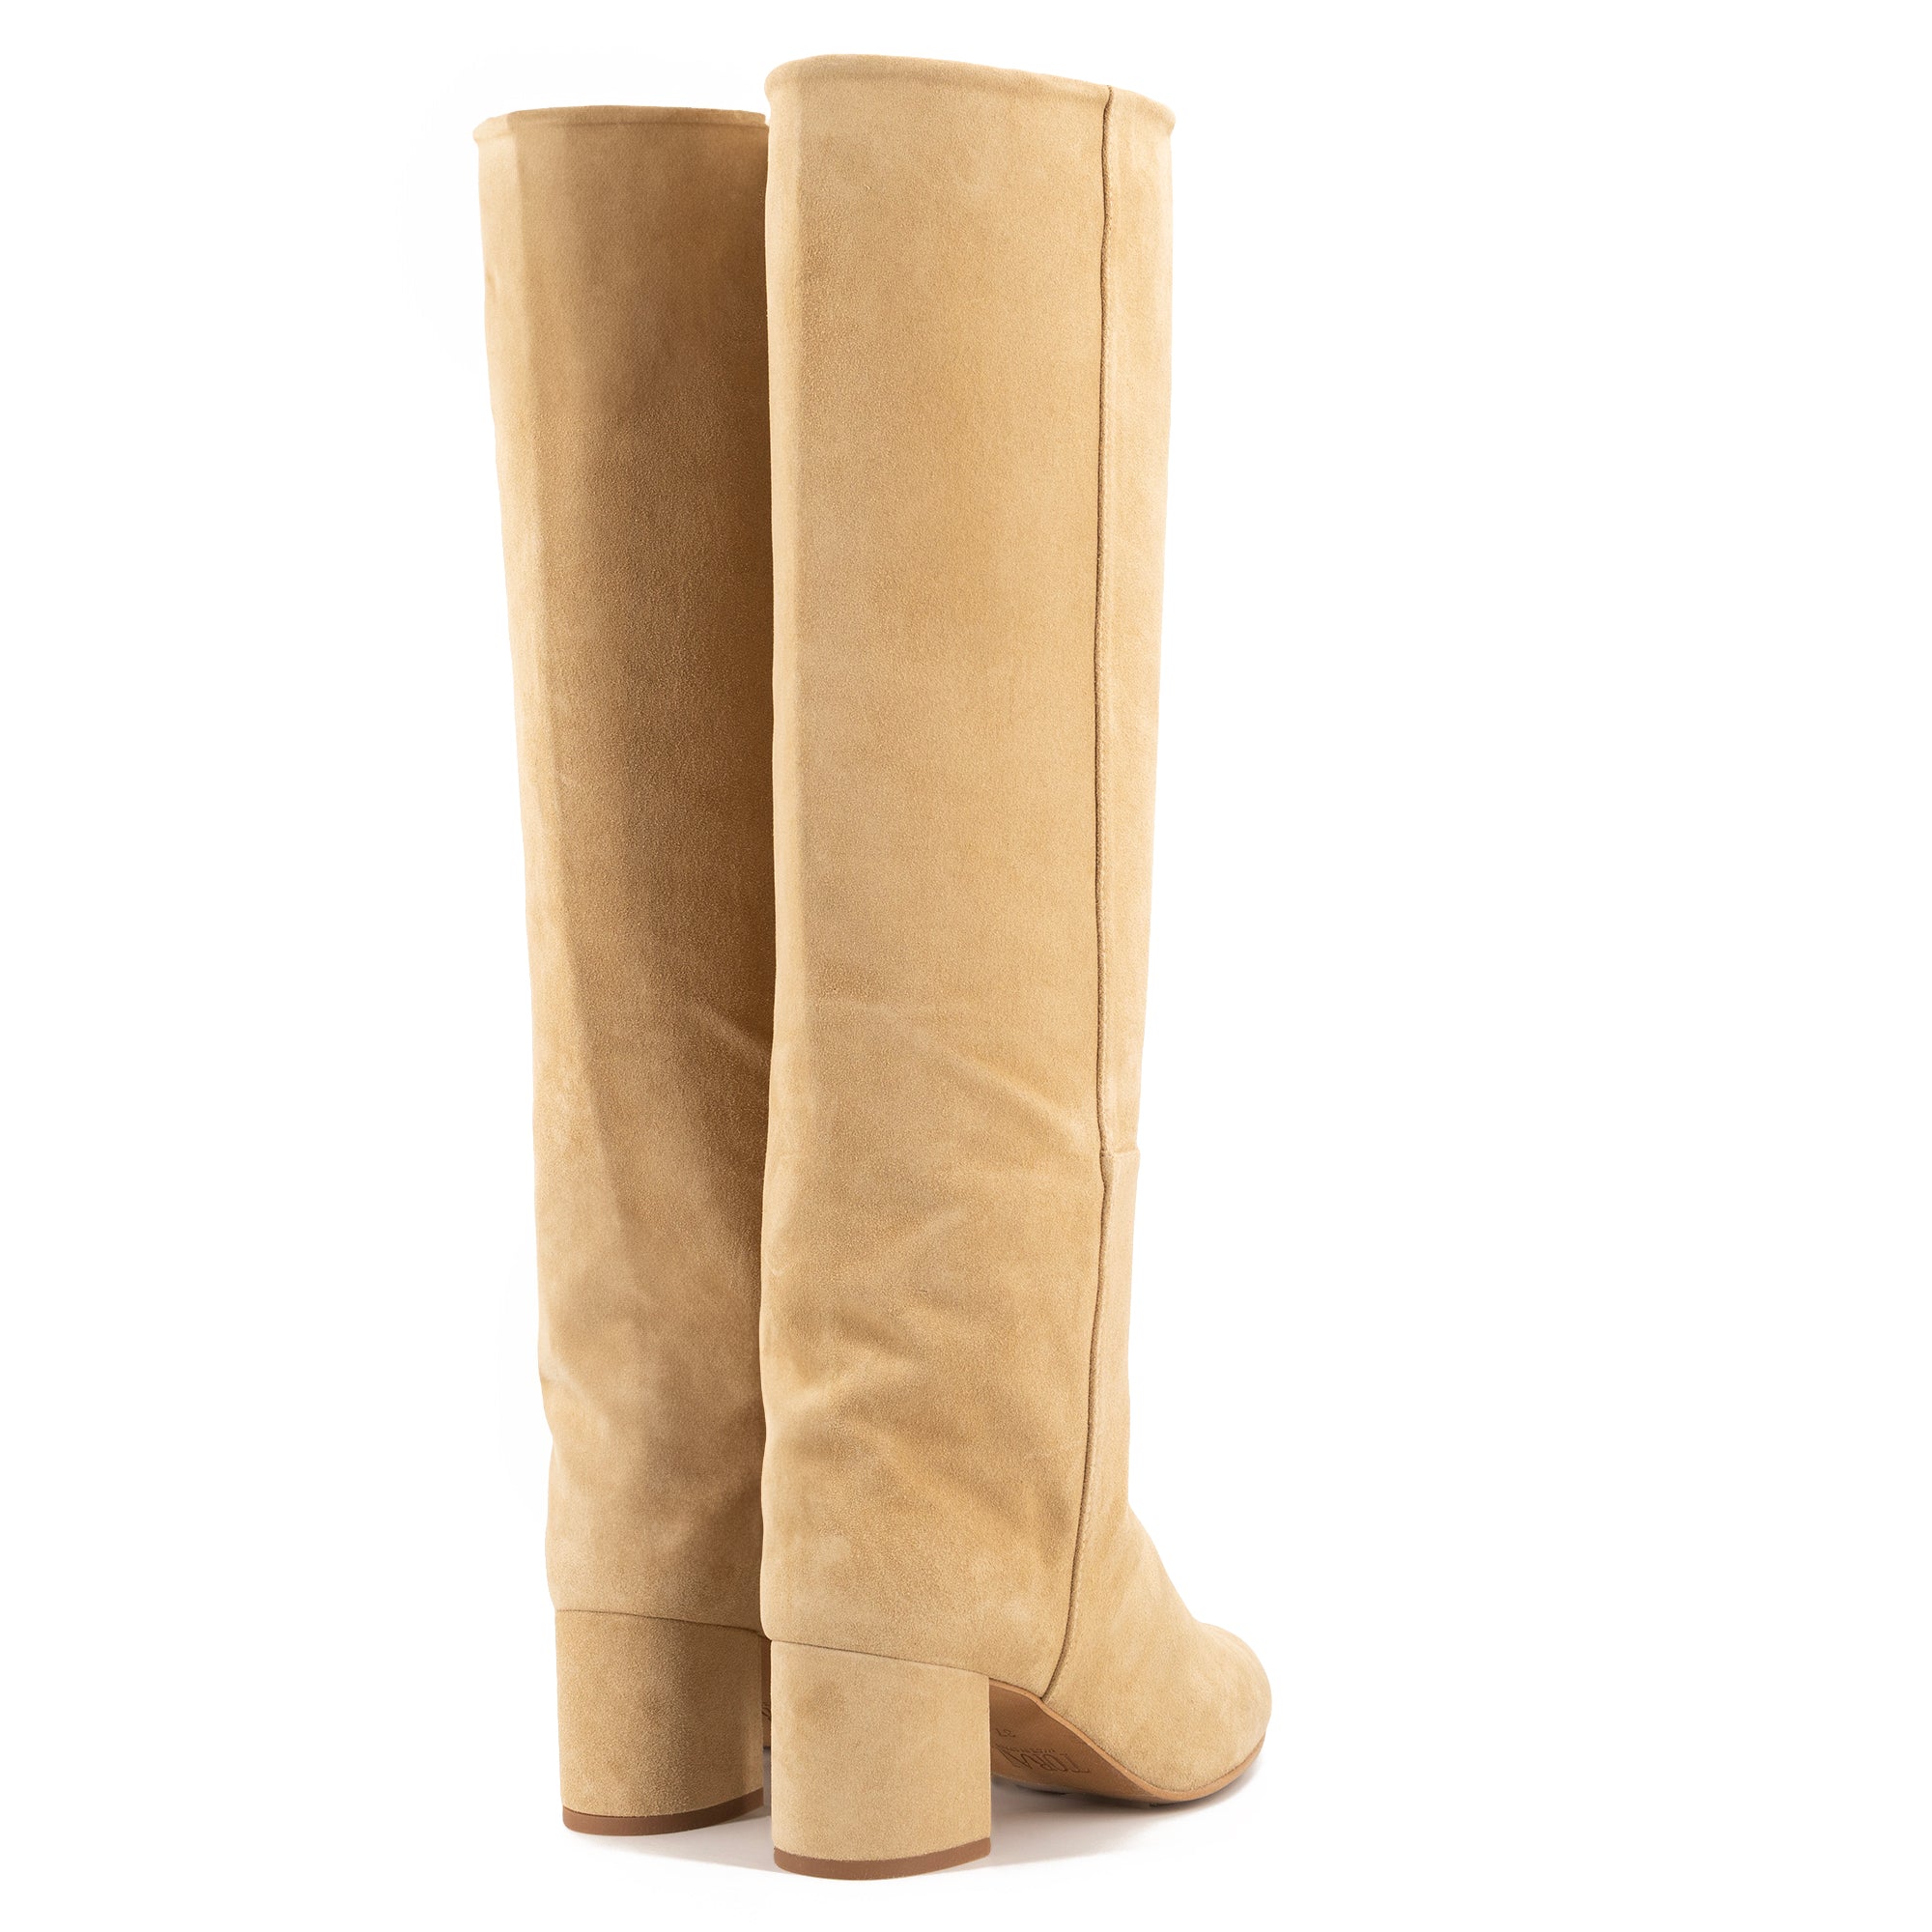 SAND SUEDE TALL BOOTS